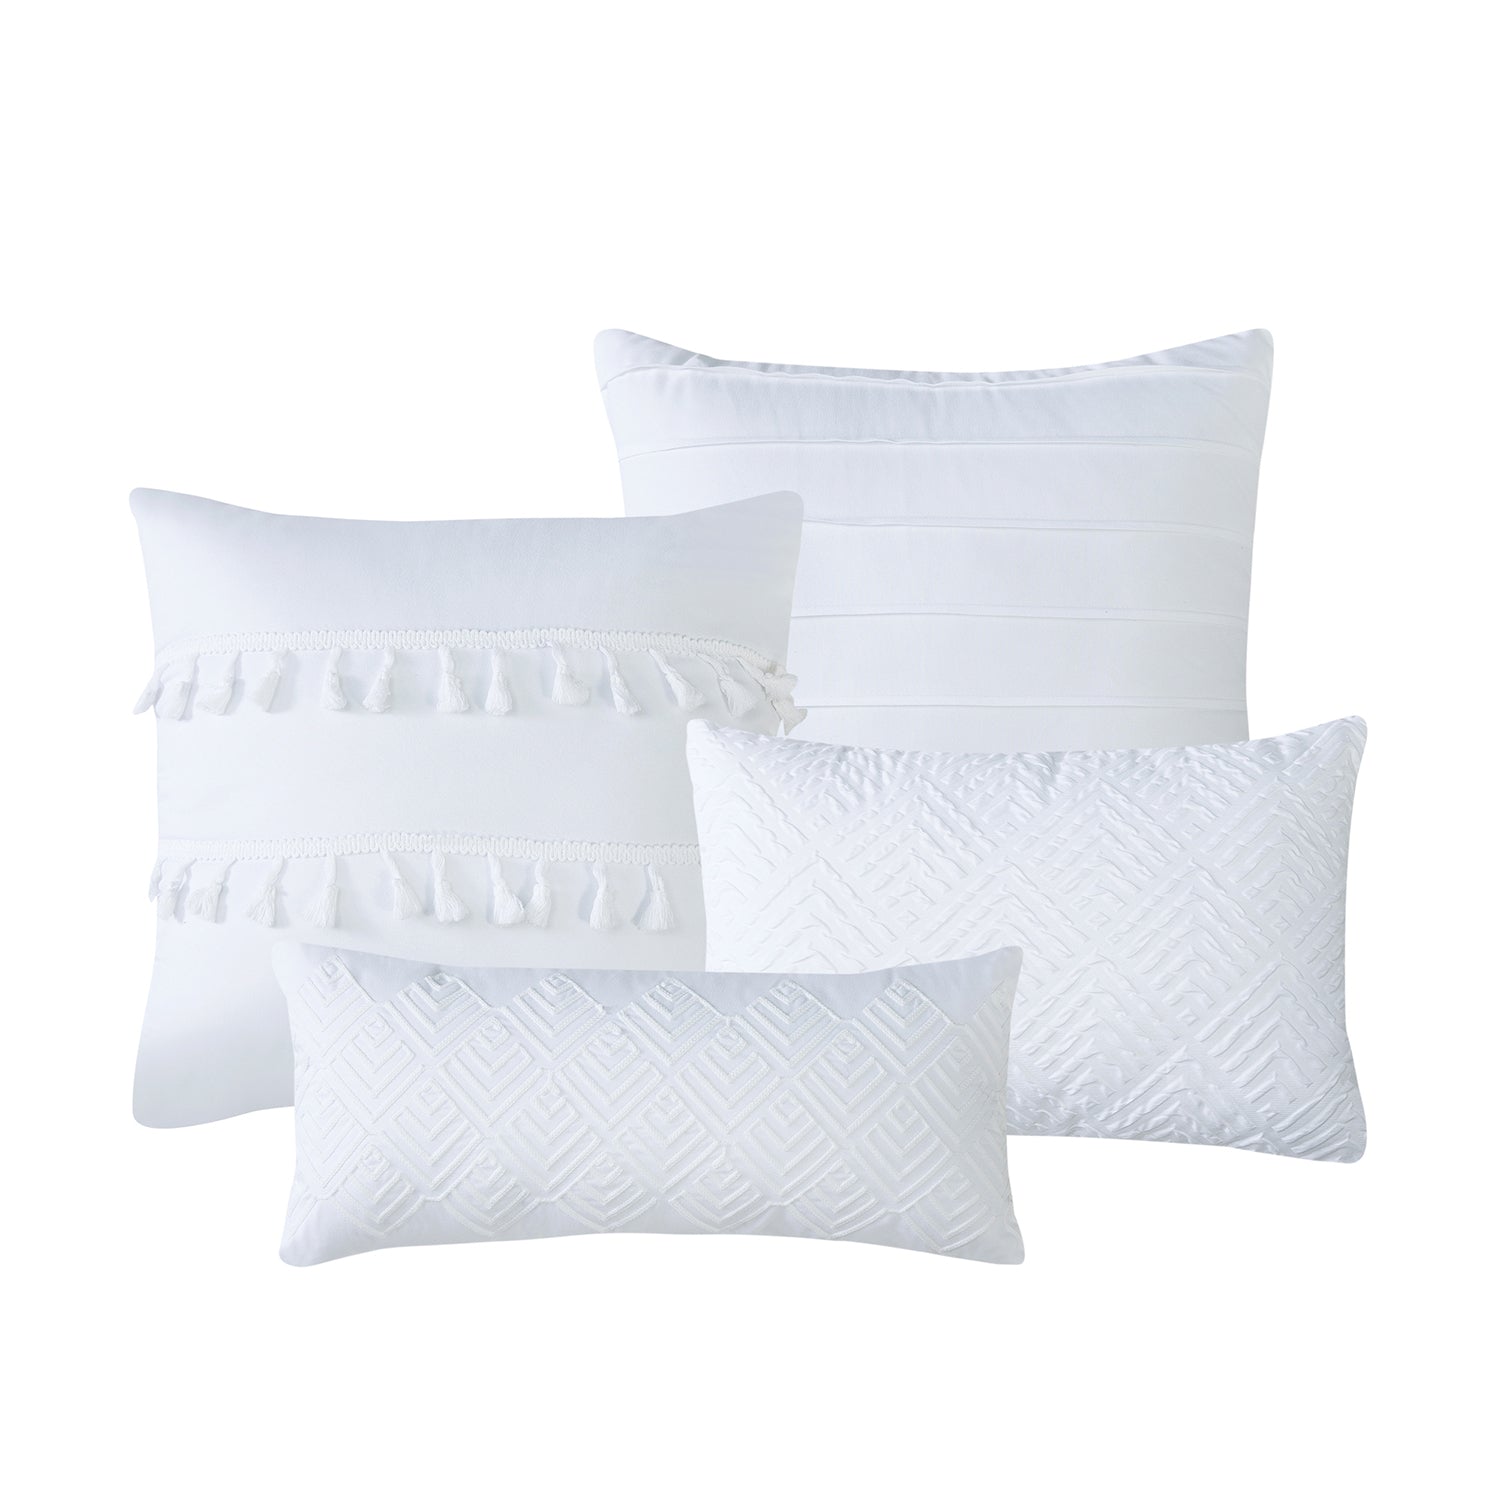 Celina 7PC BEDDING WHITE COMFORTER SET. RUFFLE & PATCHWORK, MICROFIBER FABRIC, FADE RESISTANT, SUPER SOFT, BED IN A BAG